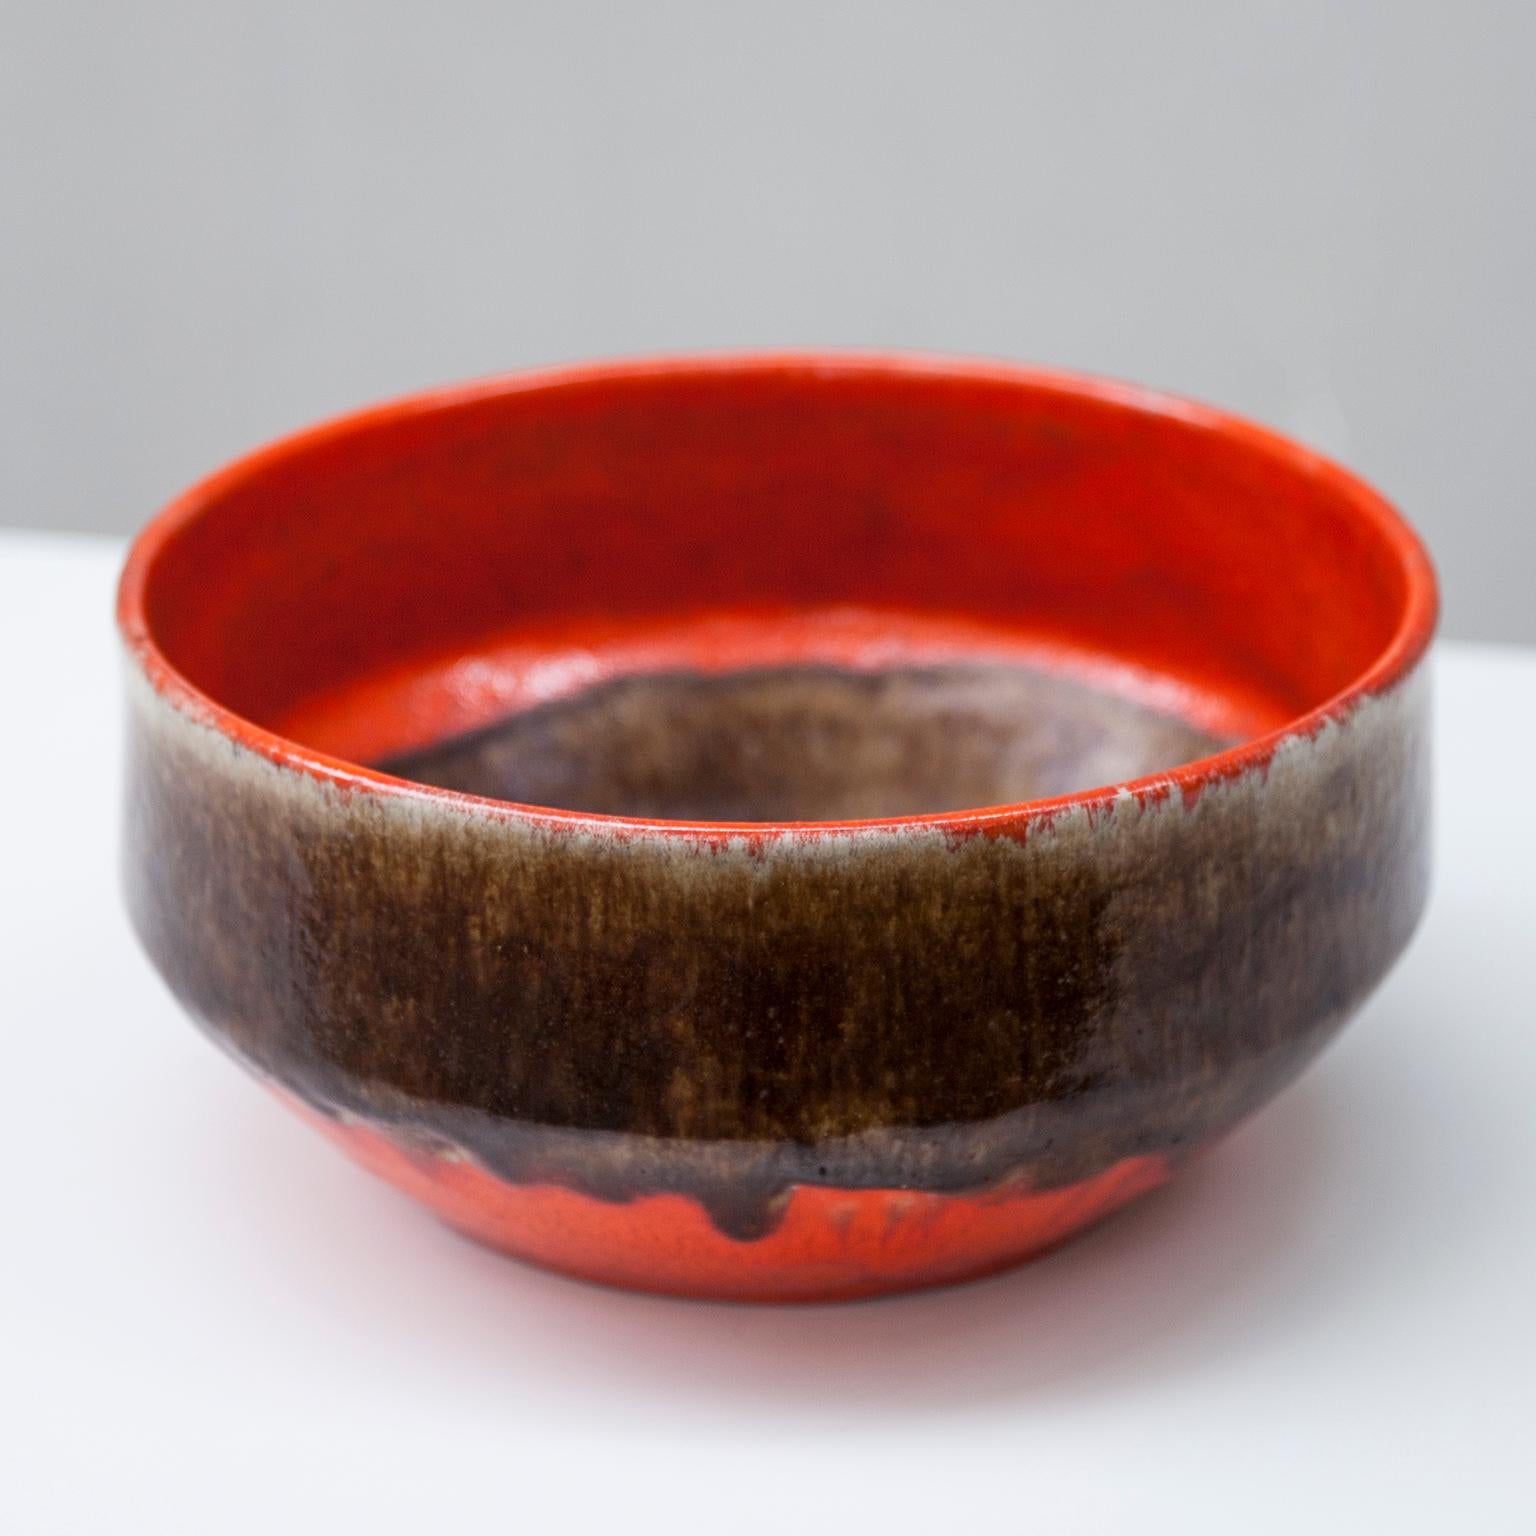 Huge ceramic bowl by Guido Gambone with brown and orange glaze.

Signed on the bottom with the donkey mark.
Guido Gambone (1909 – 1969) is one of the most important and influential Italian ceramic artist in the mid-20th century. He was born in